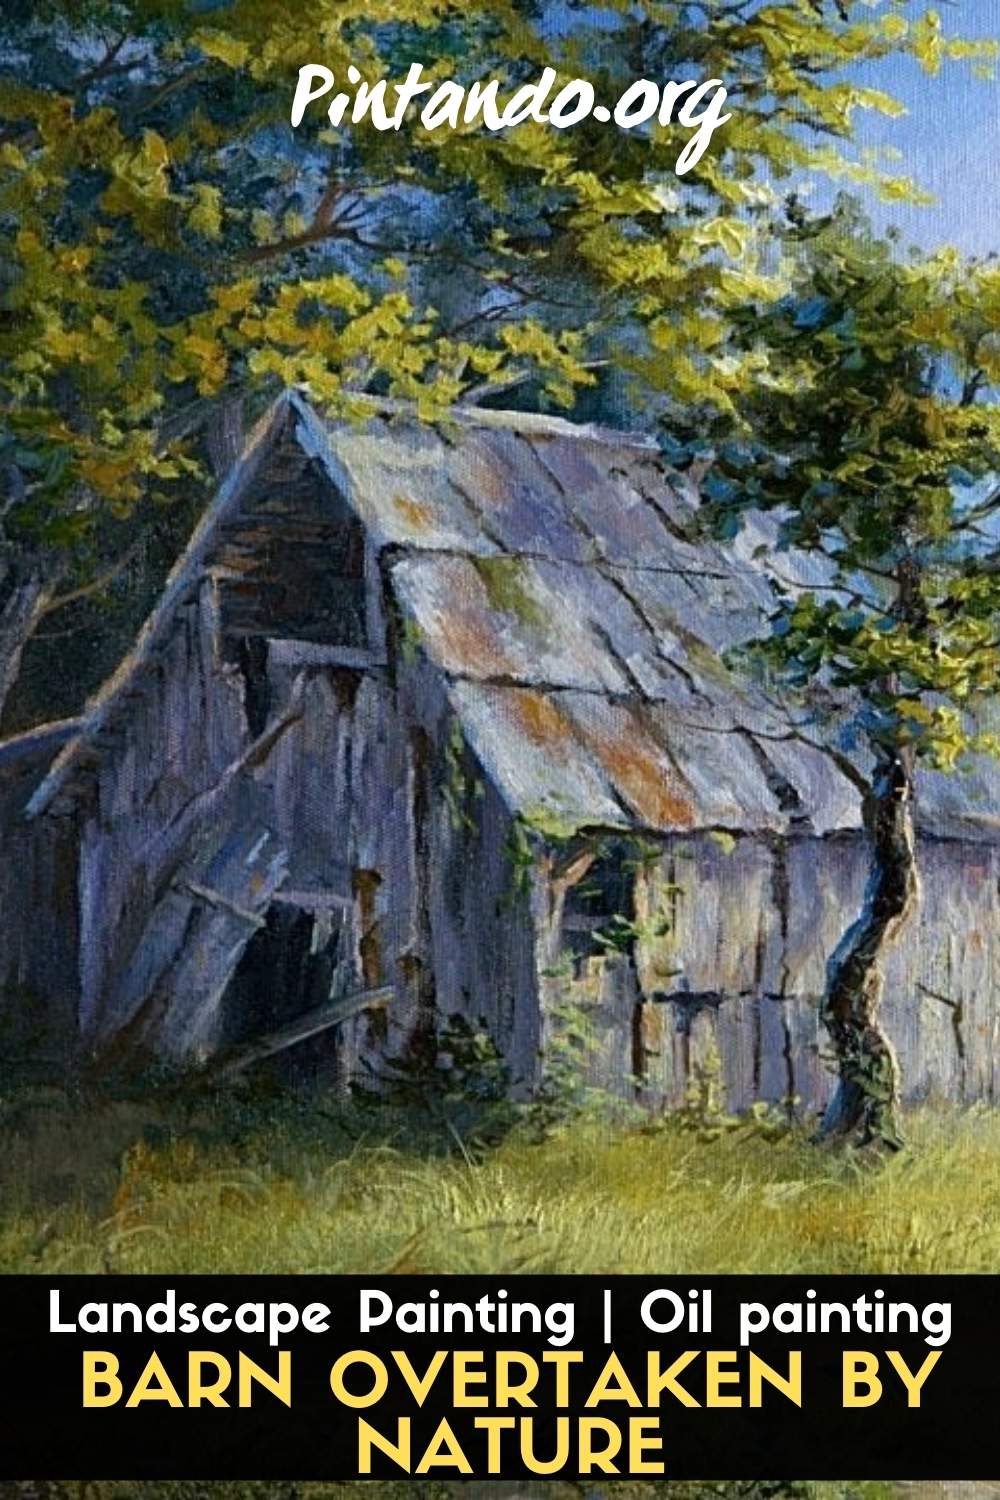 Barn Overtaken by Nature - Landscape Painting Oil painting